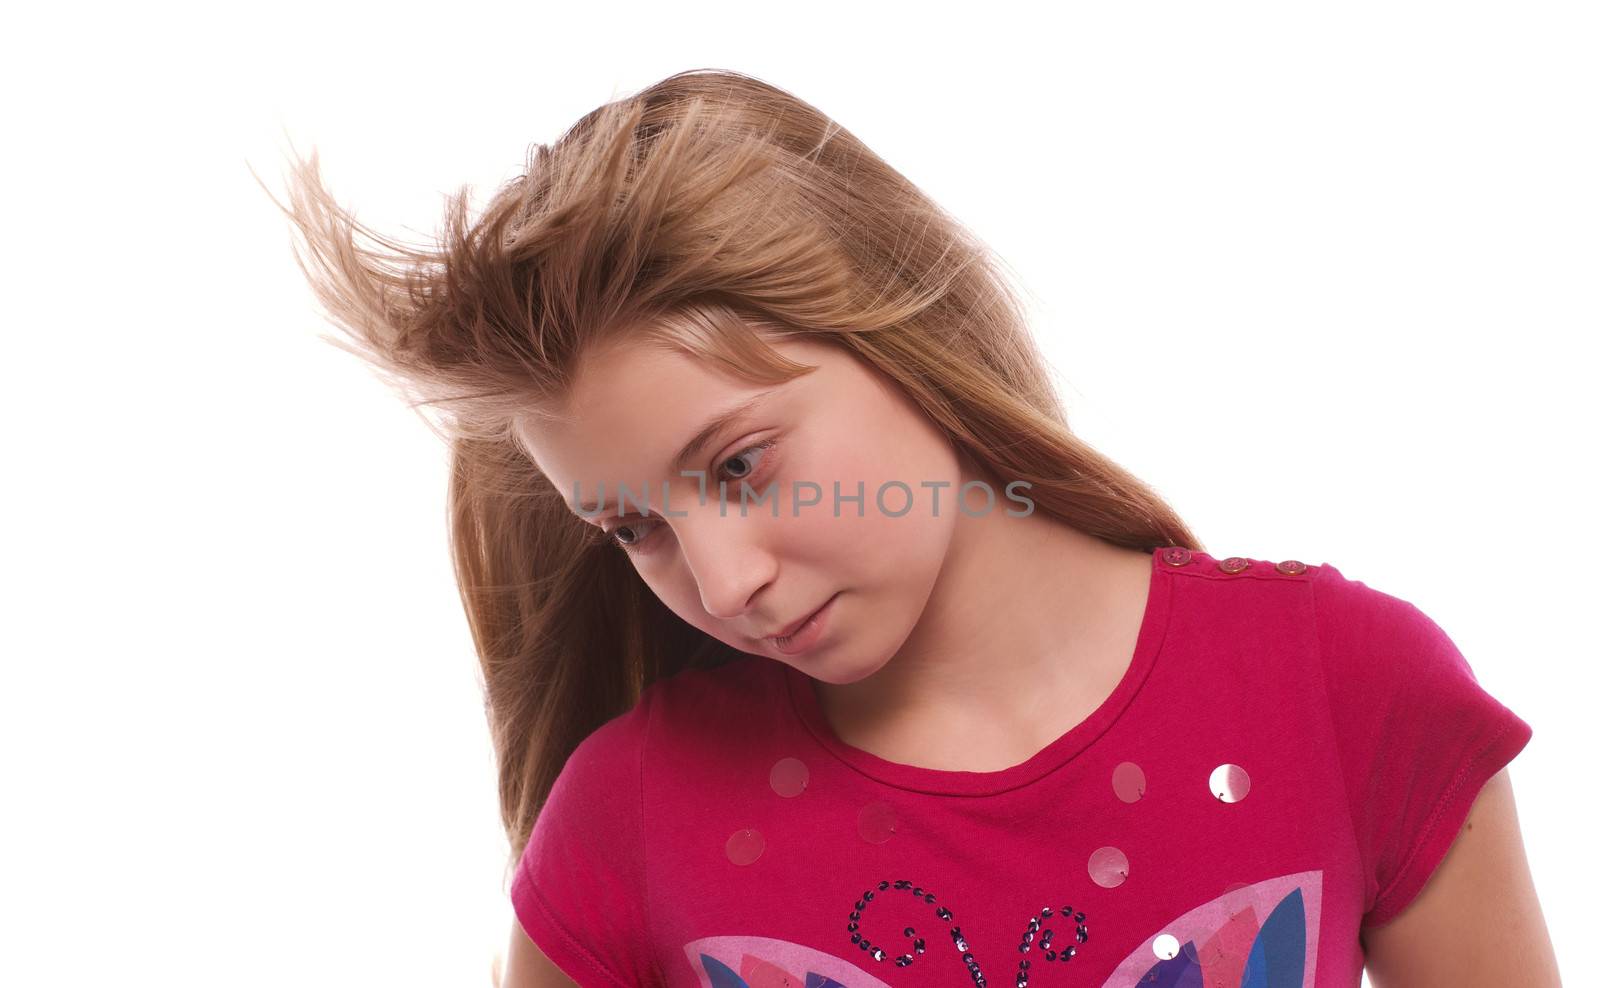 Blonde Long Hair Girl Looking Down and Dreaming on white background